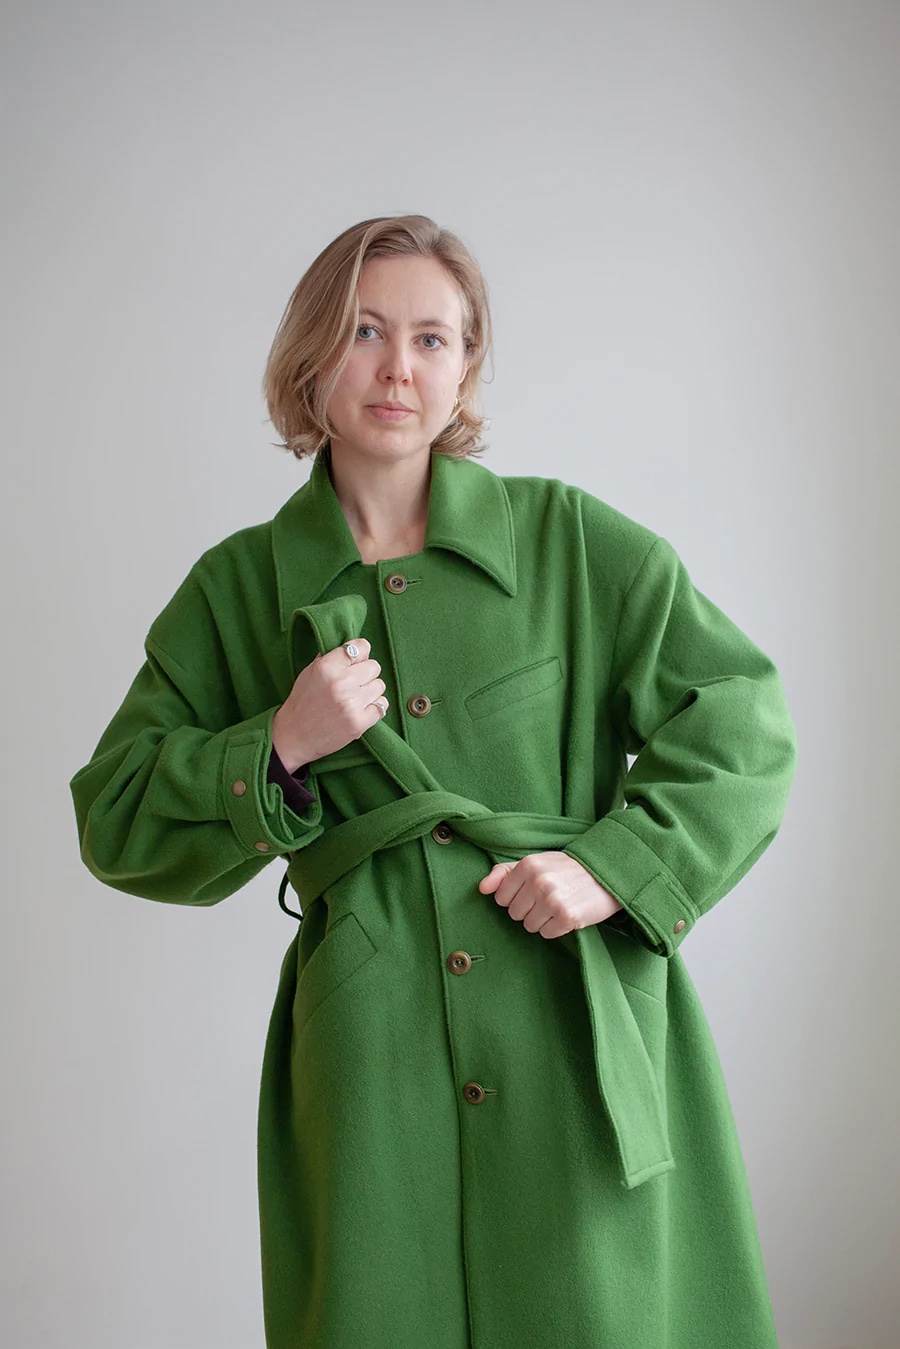 The Modern Sewing Co. Darcy Coat - The Fold Line